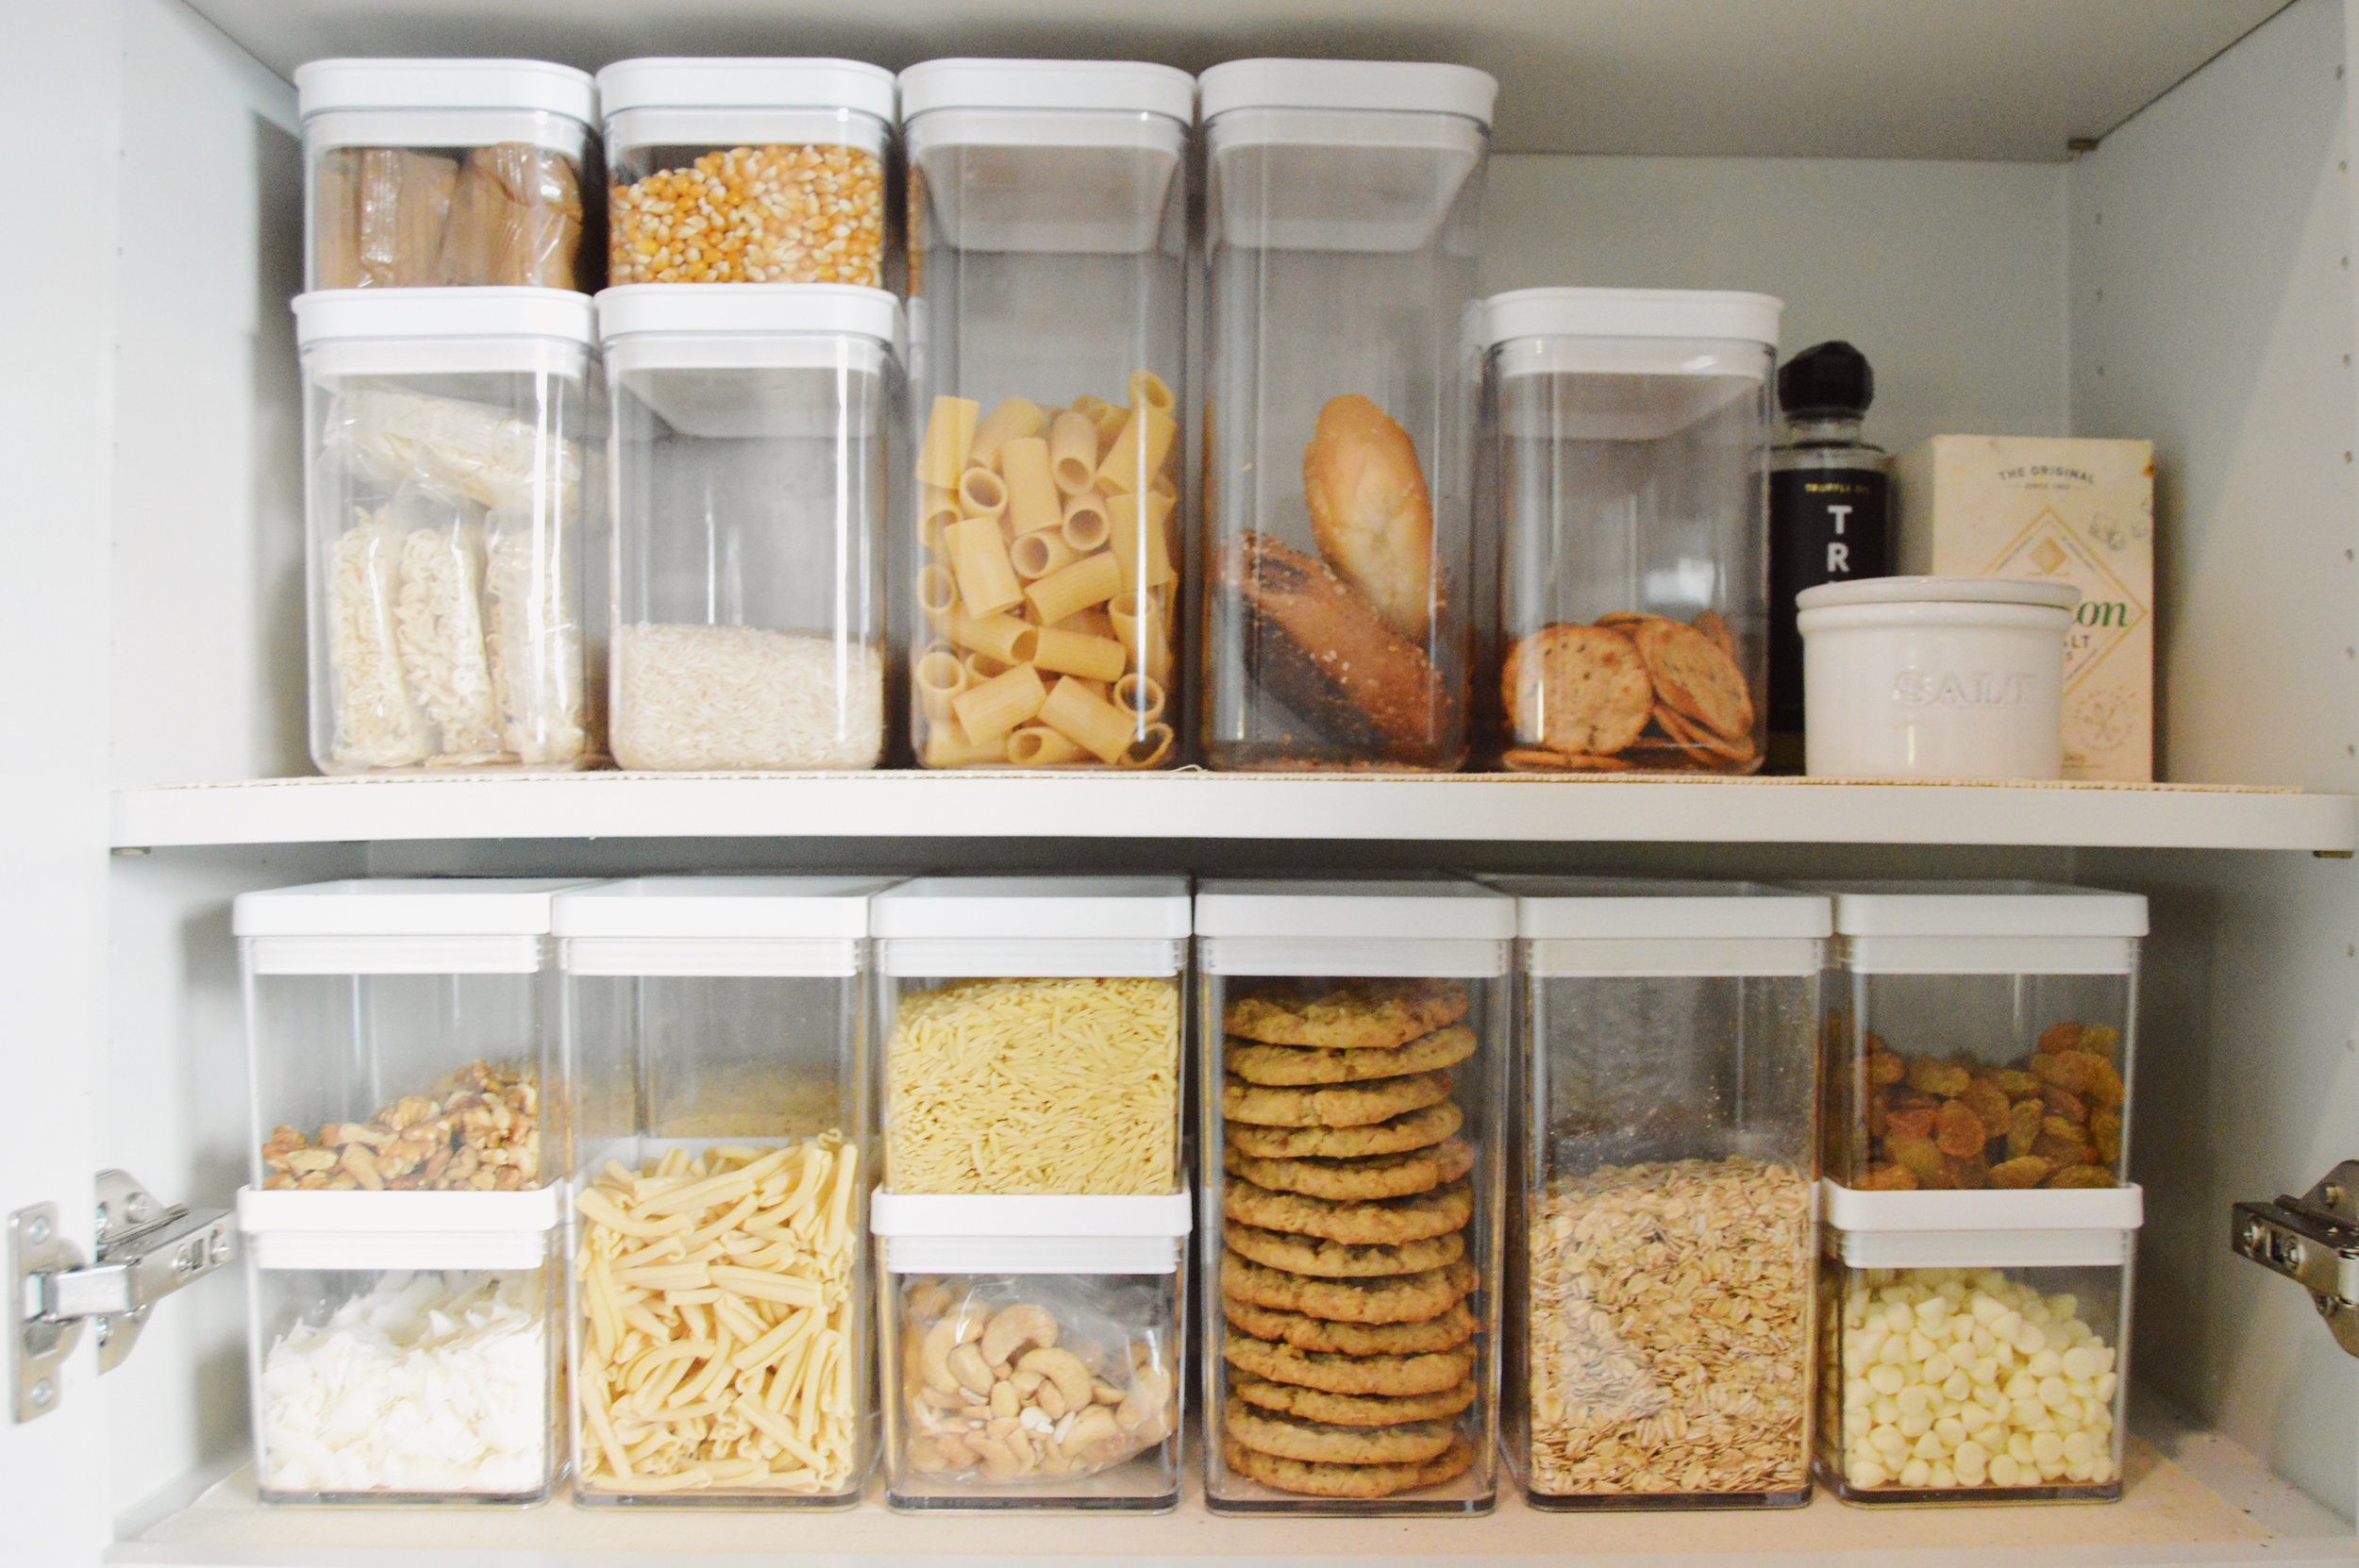  I have been on the hunt for the perfect pantry food storage containers for years - so when I found these at Target I was floored. They’re by far the least expensive, best looking, and best working food storage containers I’ve tried so far. Putting e